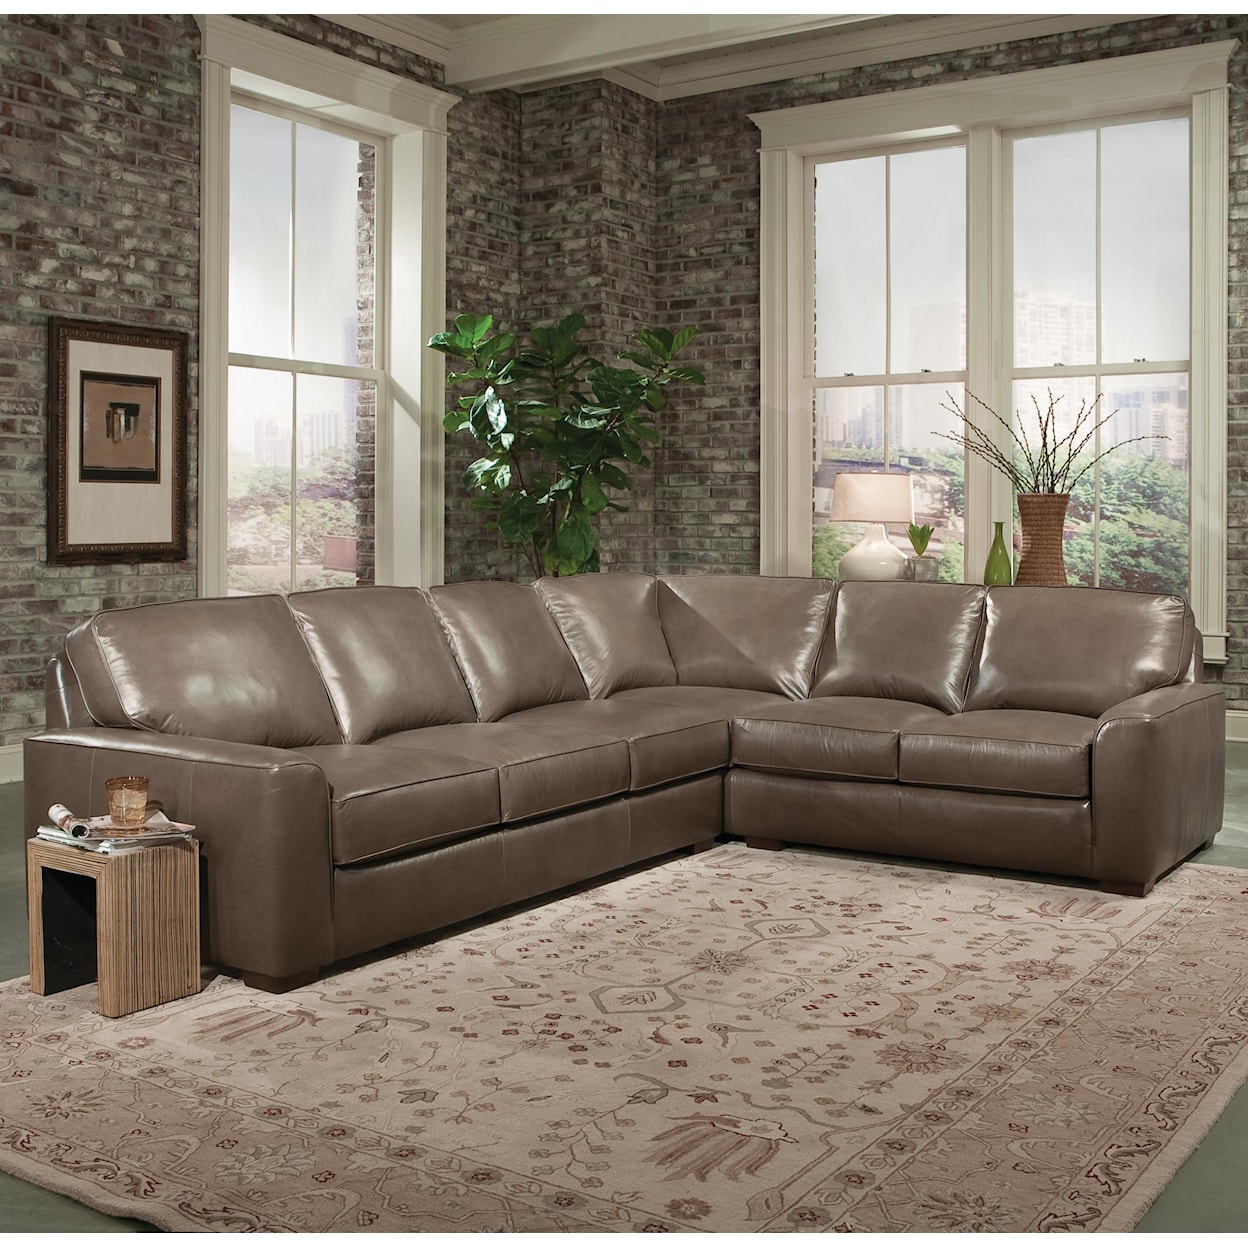 Smith Brothers Build Your Own (8000 Series) Sectional Sofa